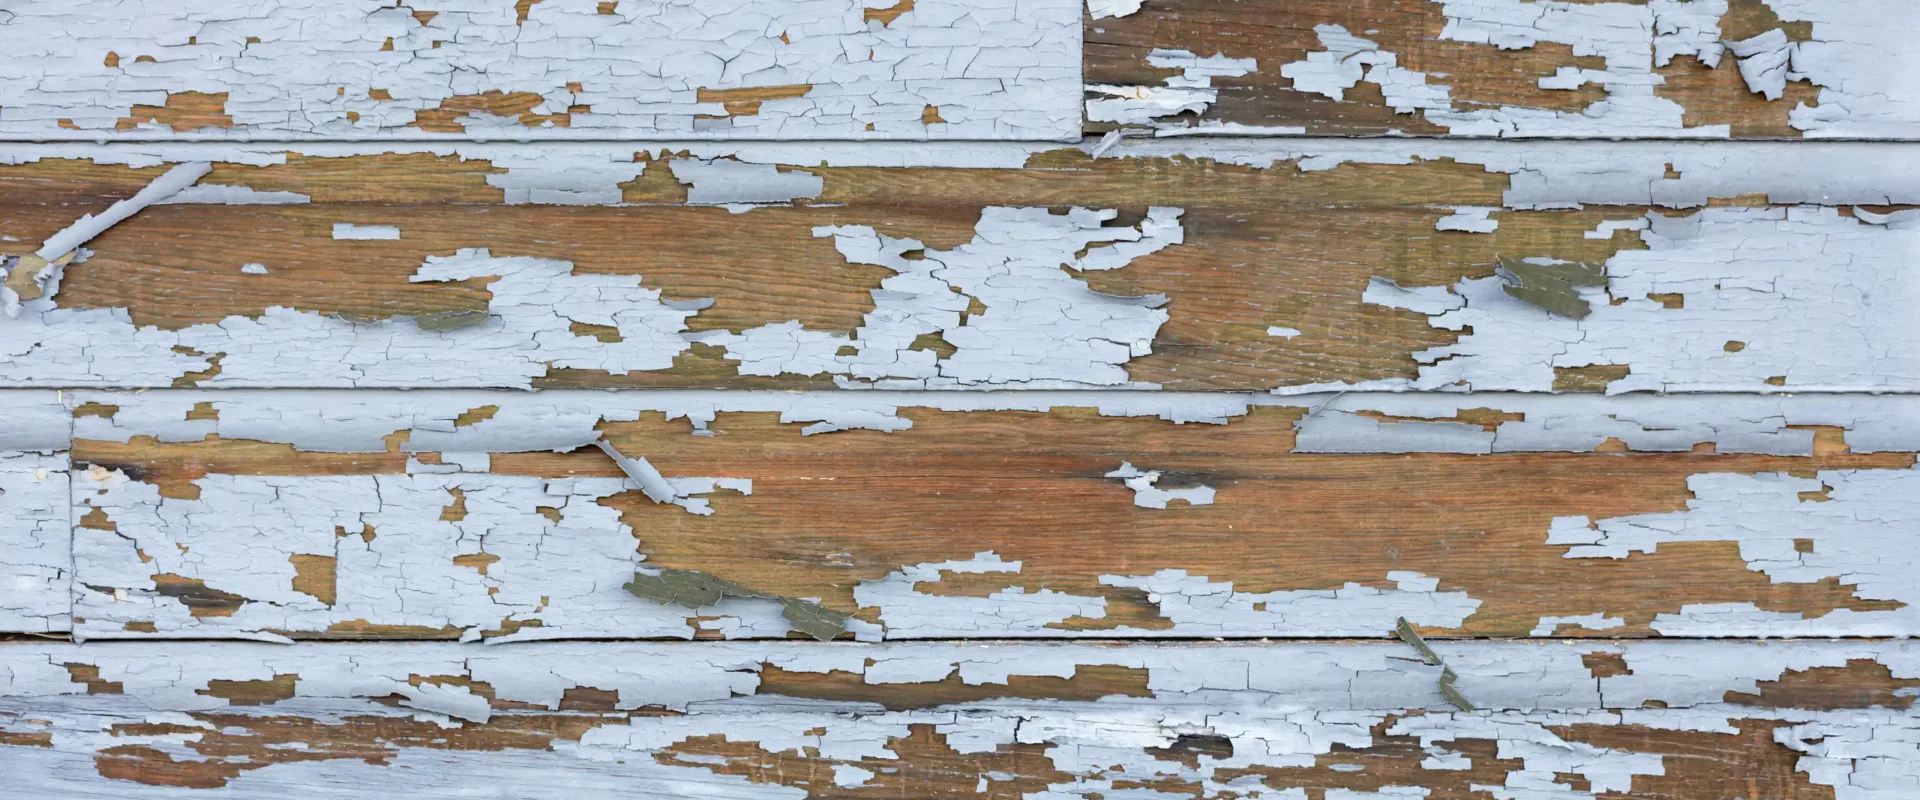 a lead paint on wooden exterior cracking